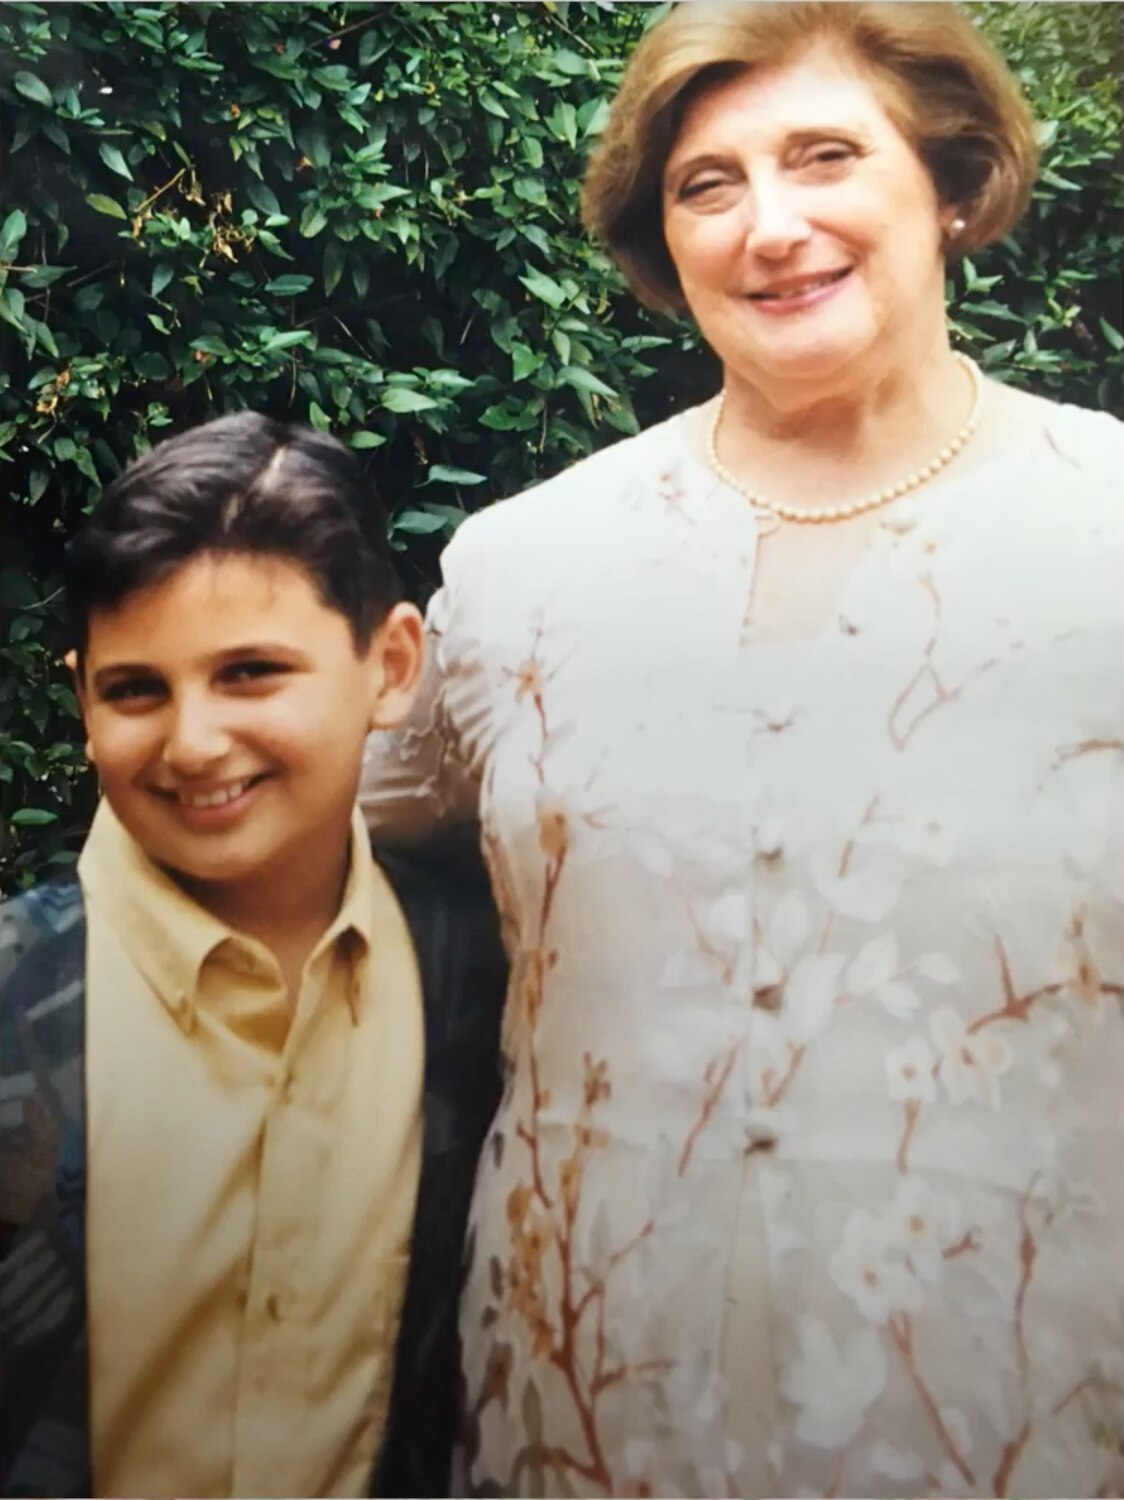 a woman with a cream floral dress and wearing a string of pearls has her arm around a young boy wearing a yellow shirt.